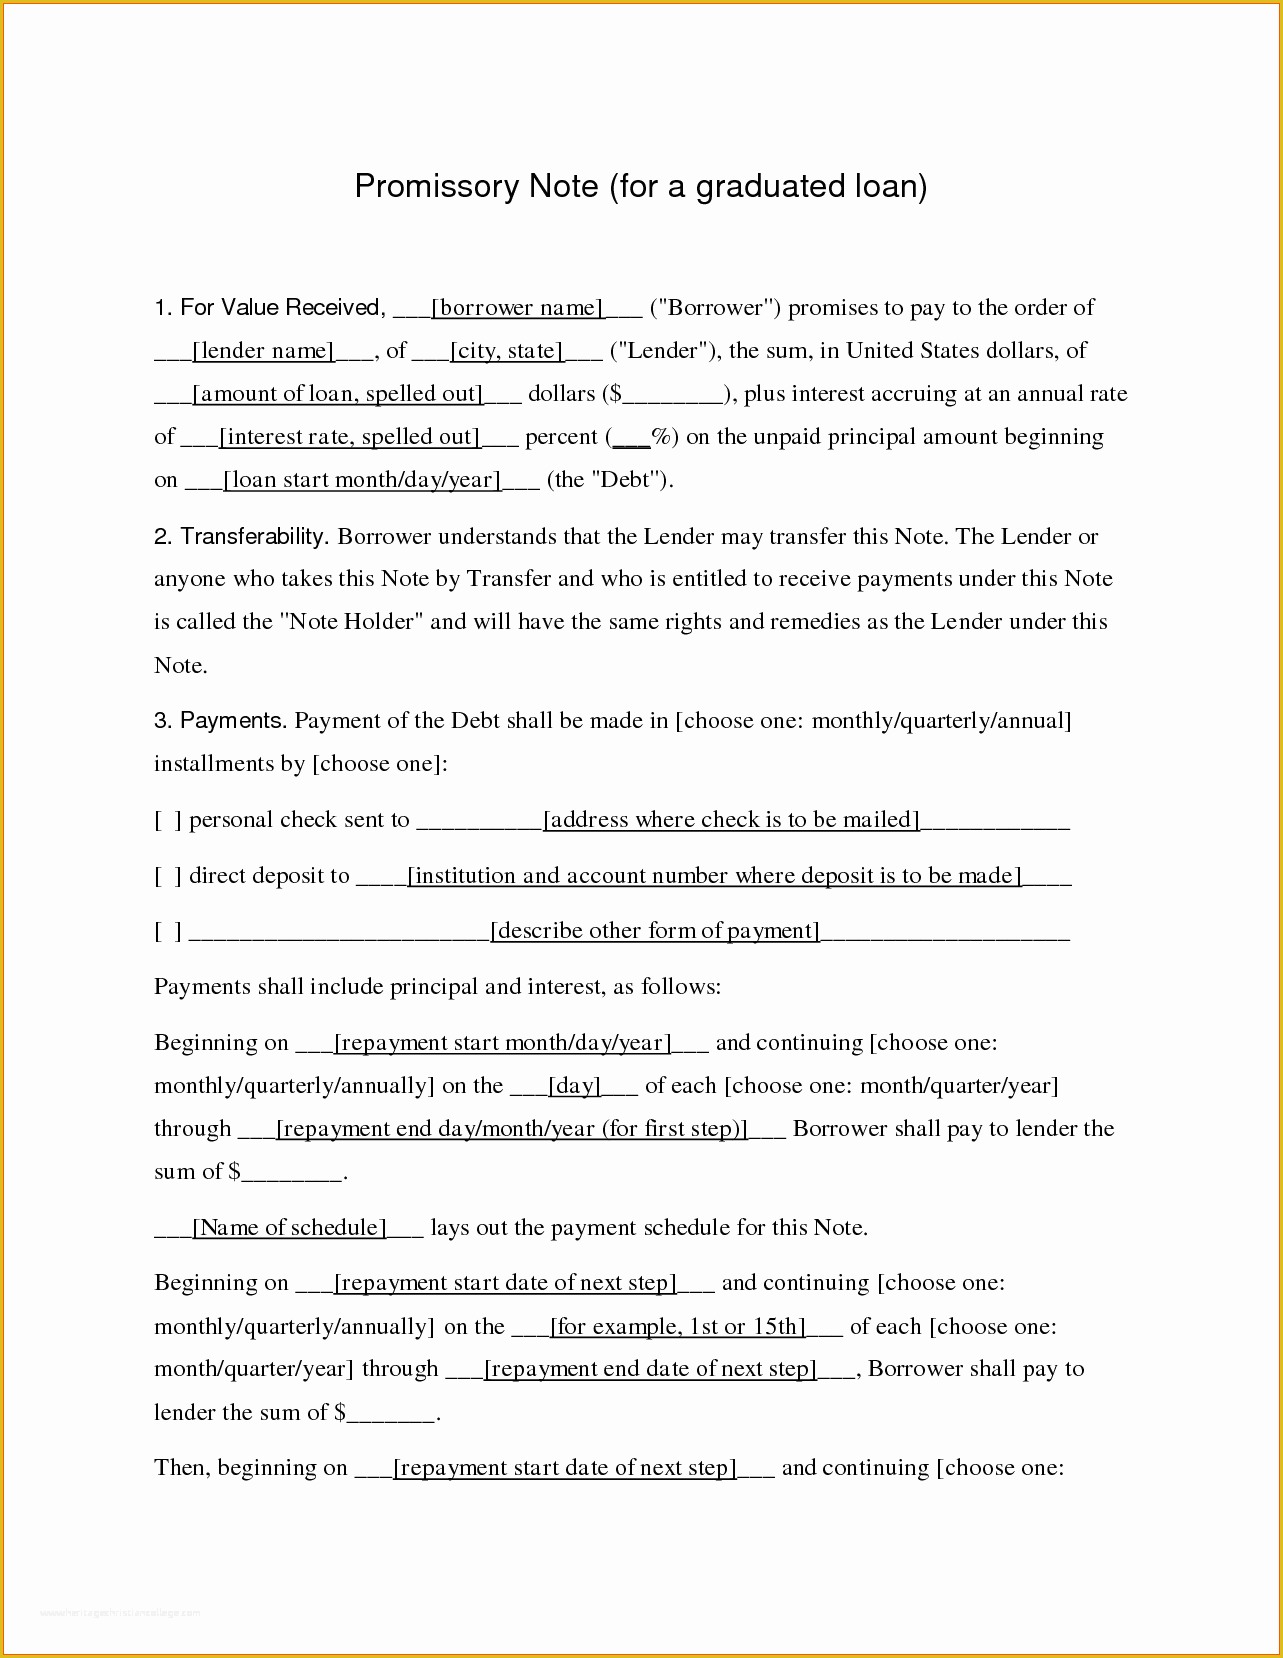 Free Promissory Note Template for A Vehicle Of Vehicle Promissory Note Template Portablegasgrillweber